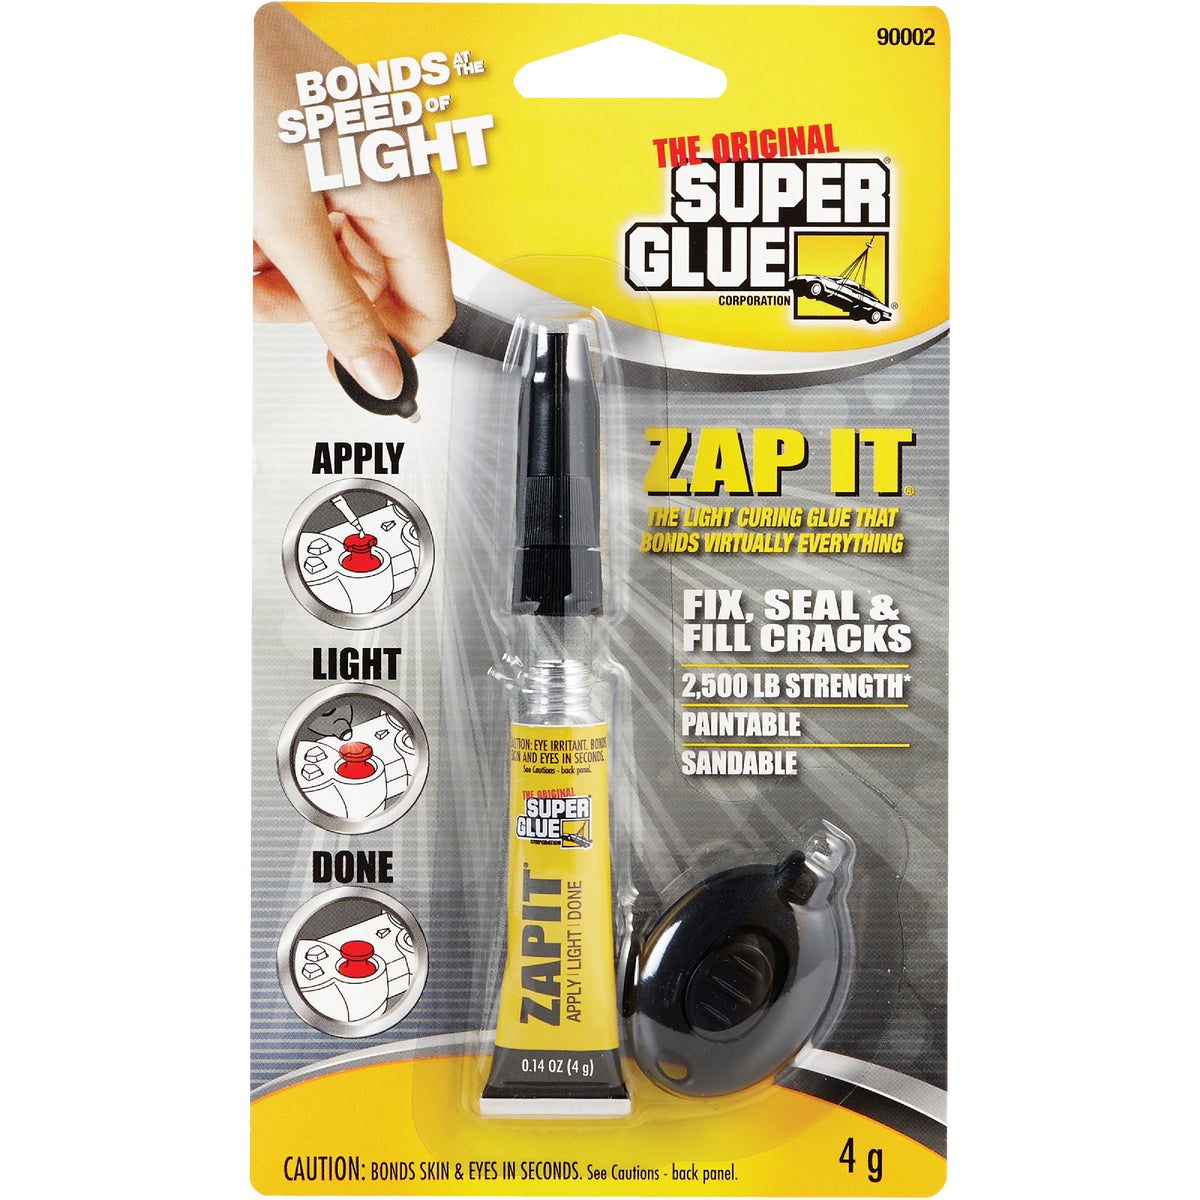 Item 301181, ZAP IT is the light curing glue that bonds virtually everything.